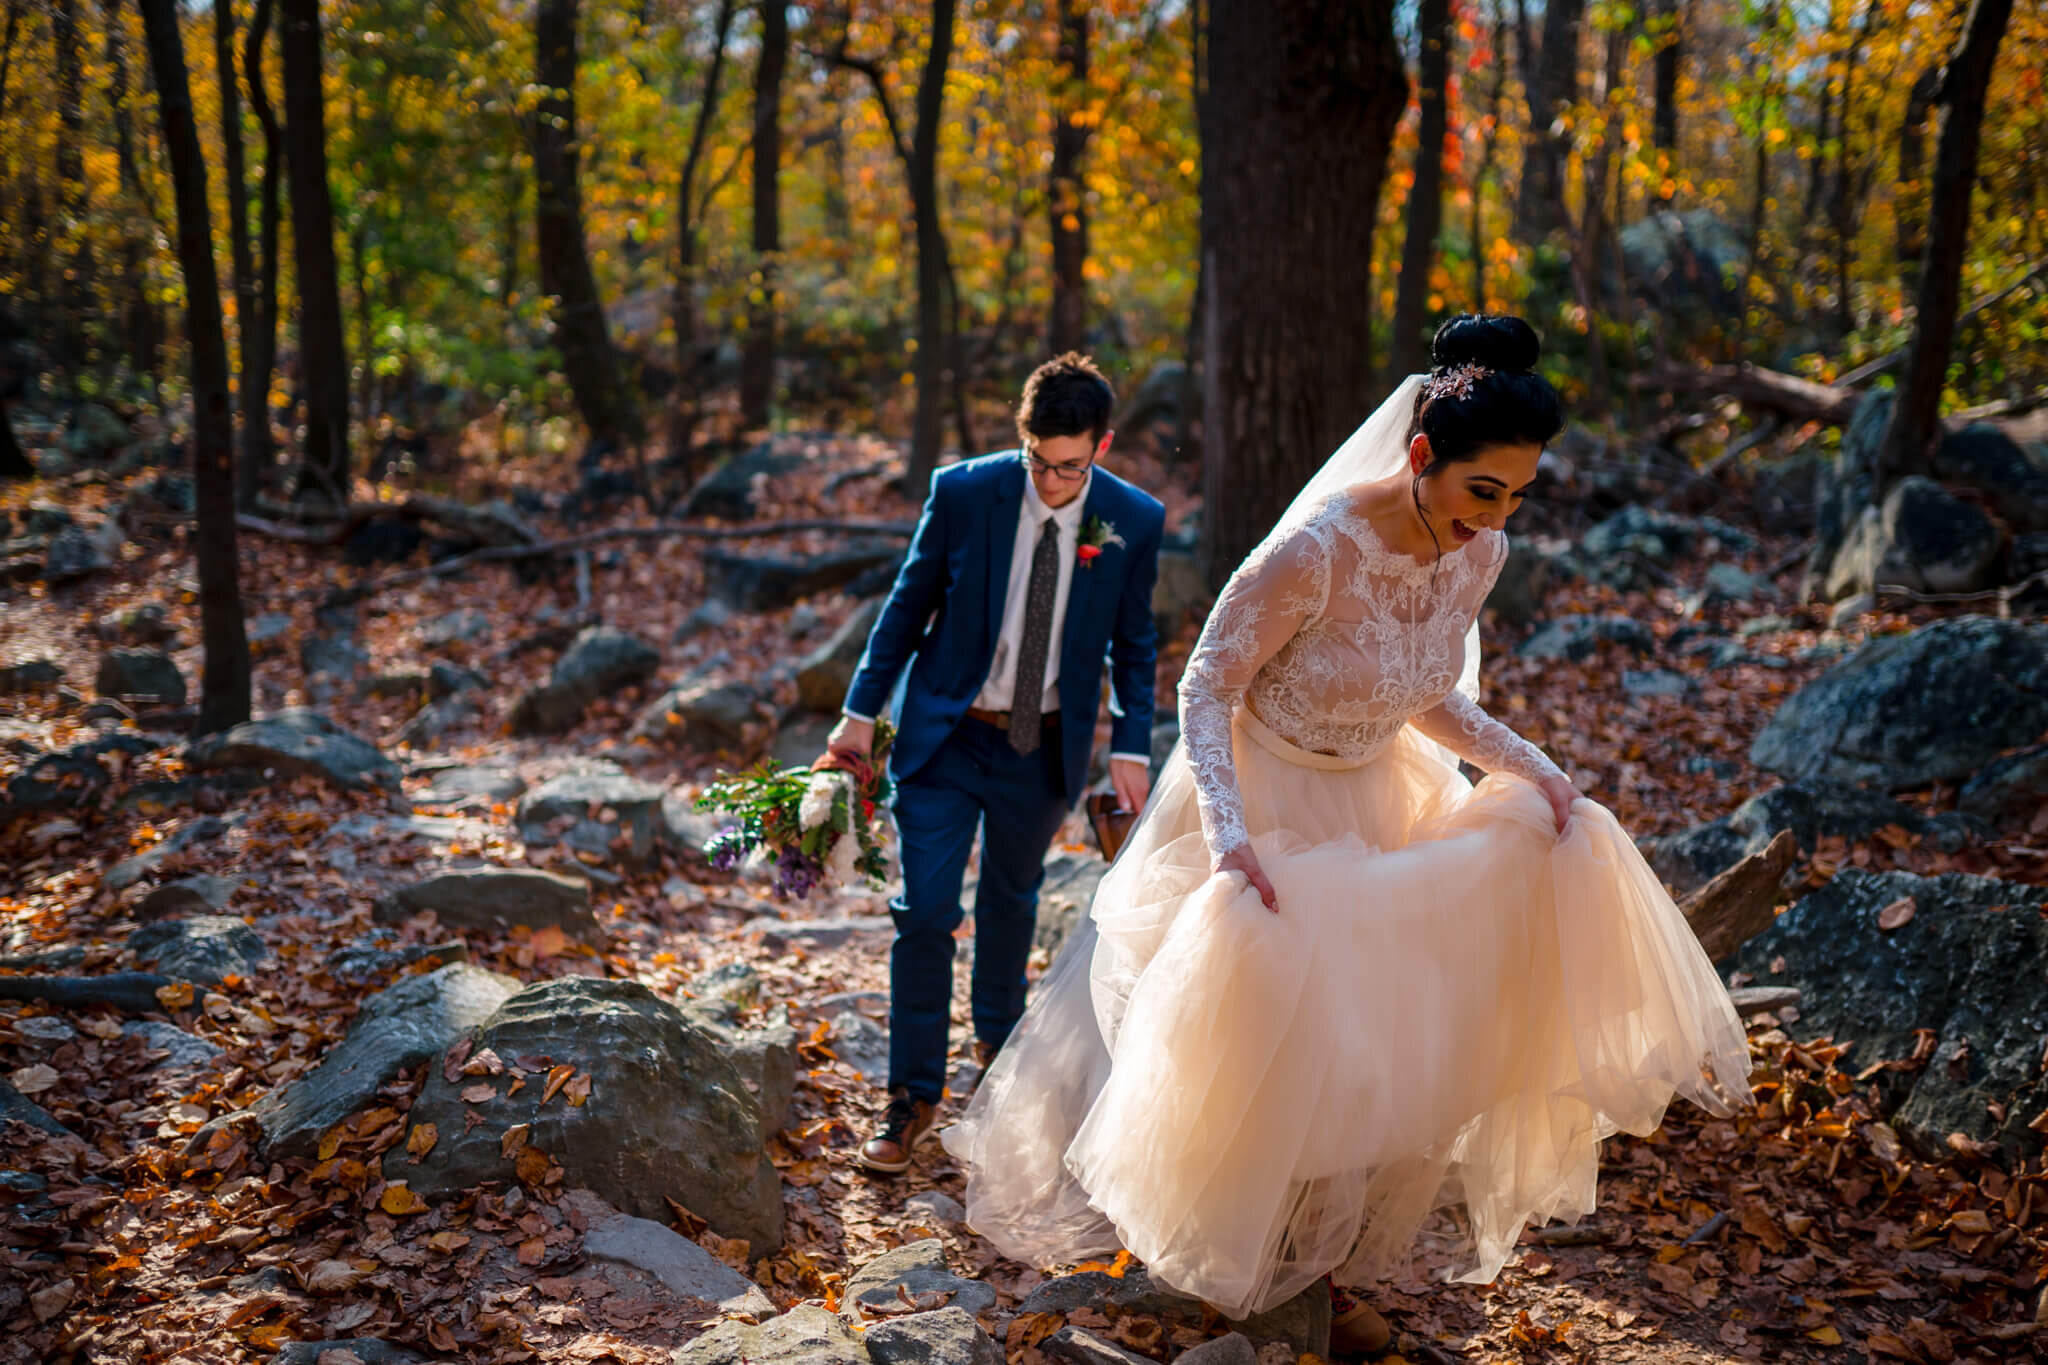 02-Ayla-Lee-Sugarloaf-Mountain-Elopement-Autumn-Summit-Wedding-Ceremony-Photography-by-Bee-Two-Sweet-27.jpg